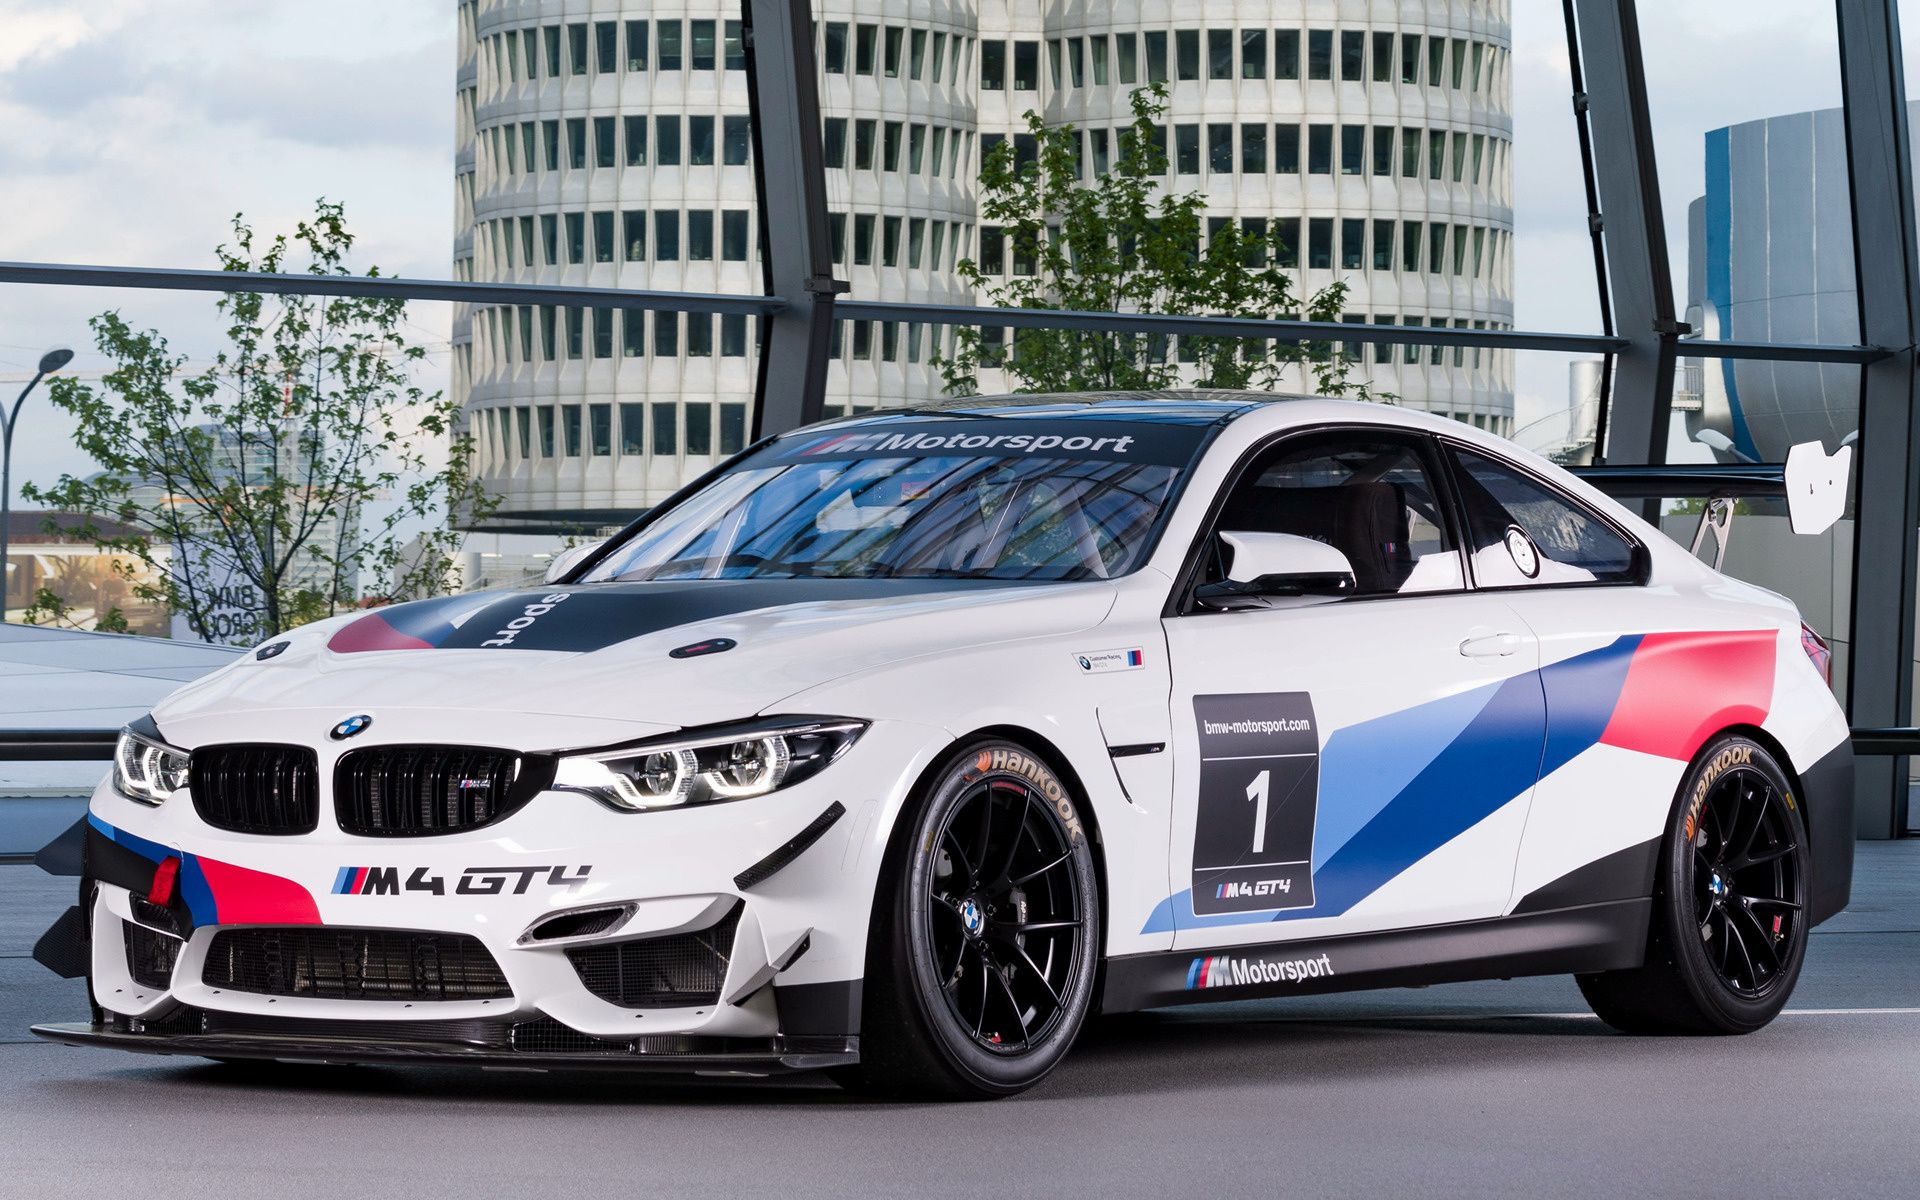 BMW M4 GT4 and HD Image